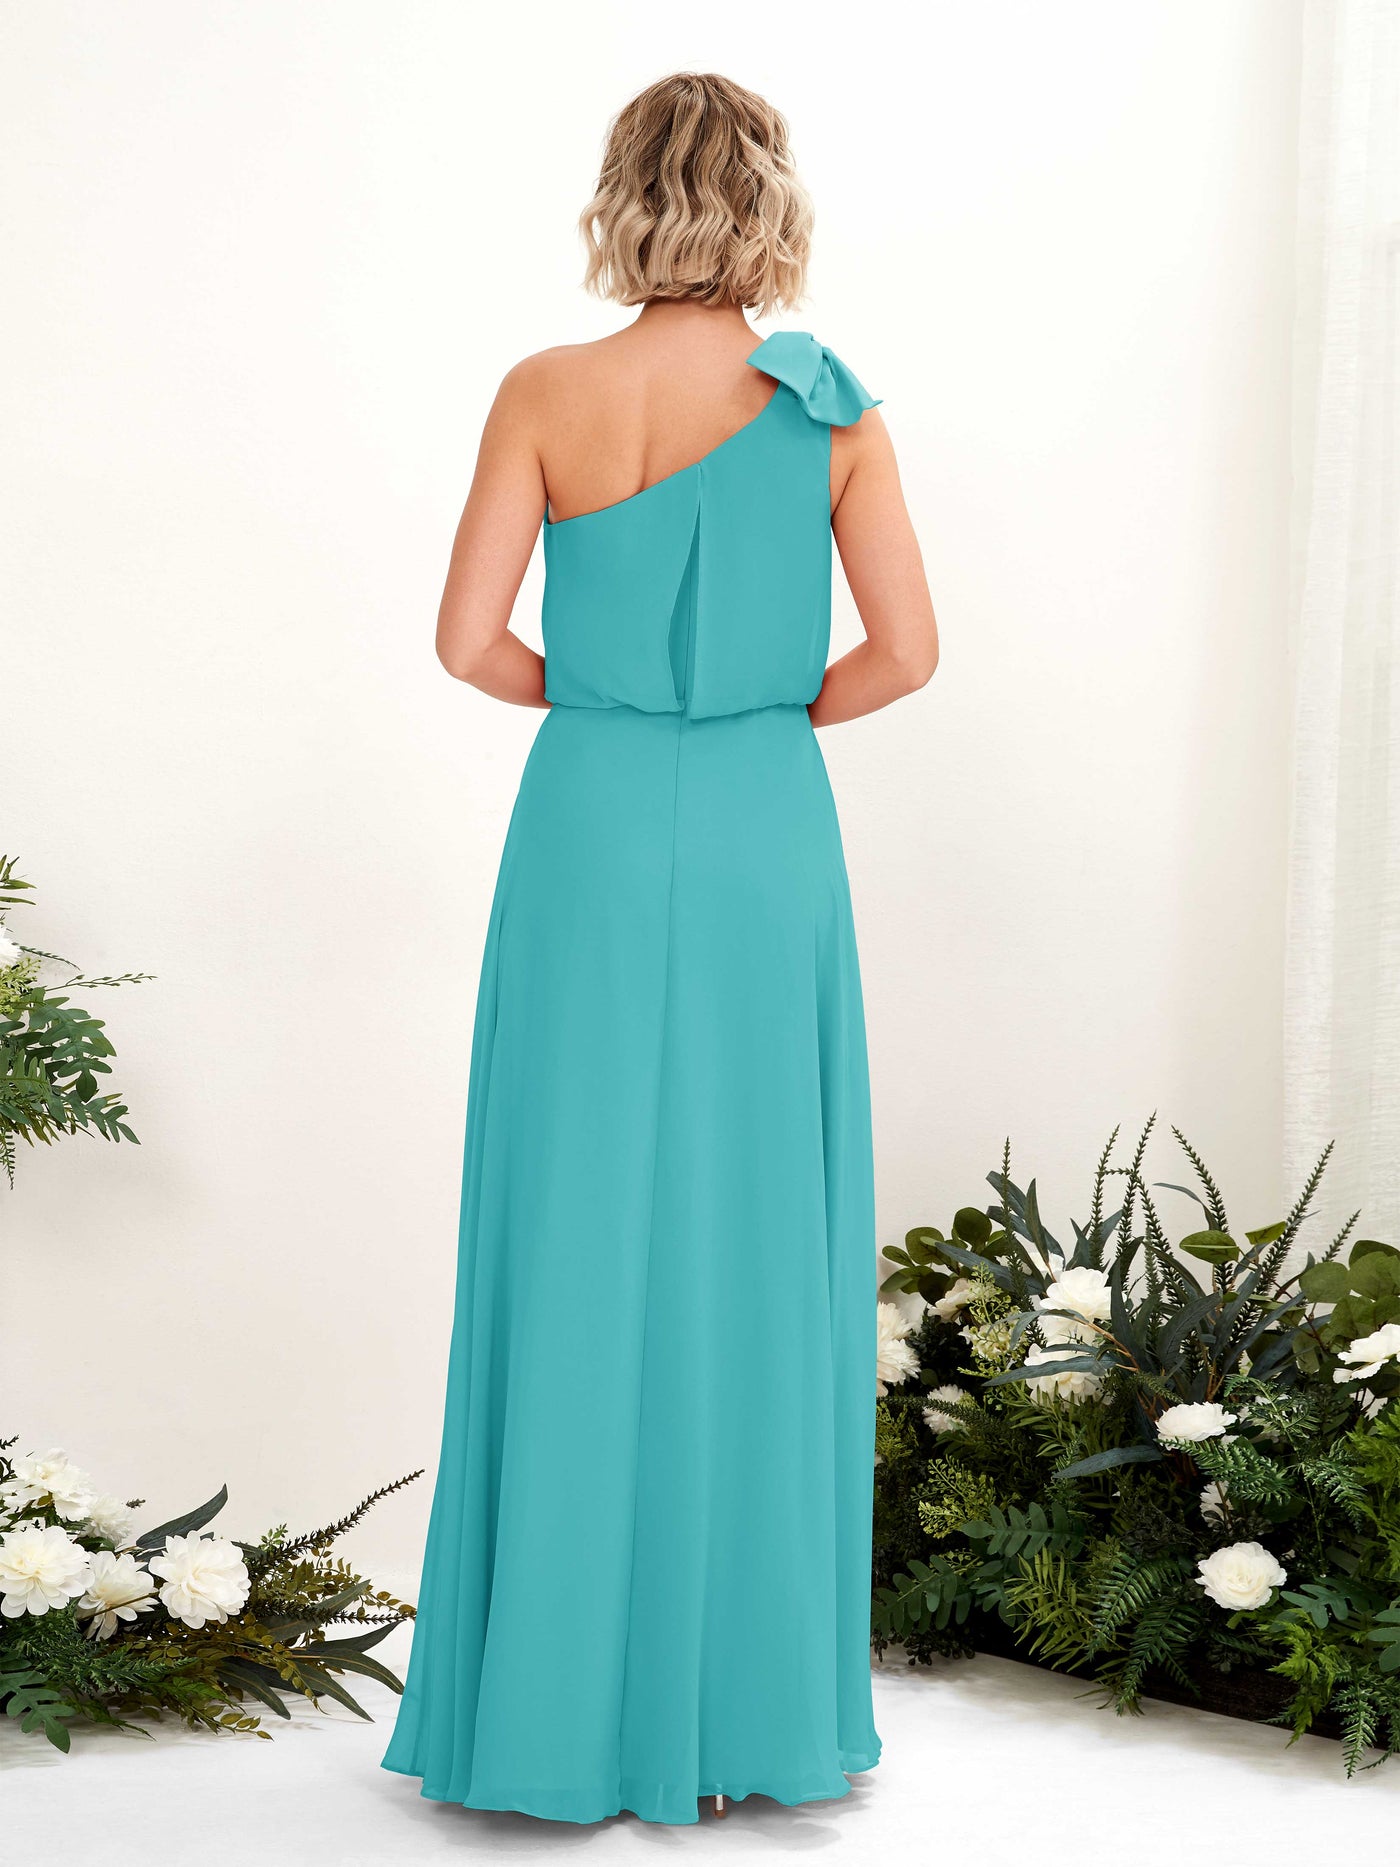 Turquoise Bridesmaid Dresses Bridesmaid Dress A-line Chiffon One Shoulder Full Length Sleeveless Wedding Party Dress (81225523)#color_turquoise